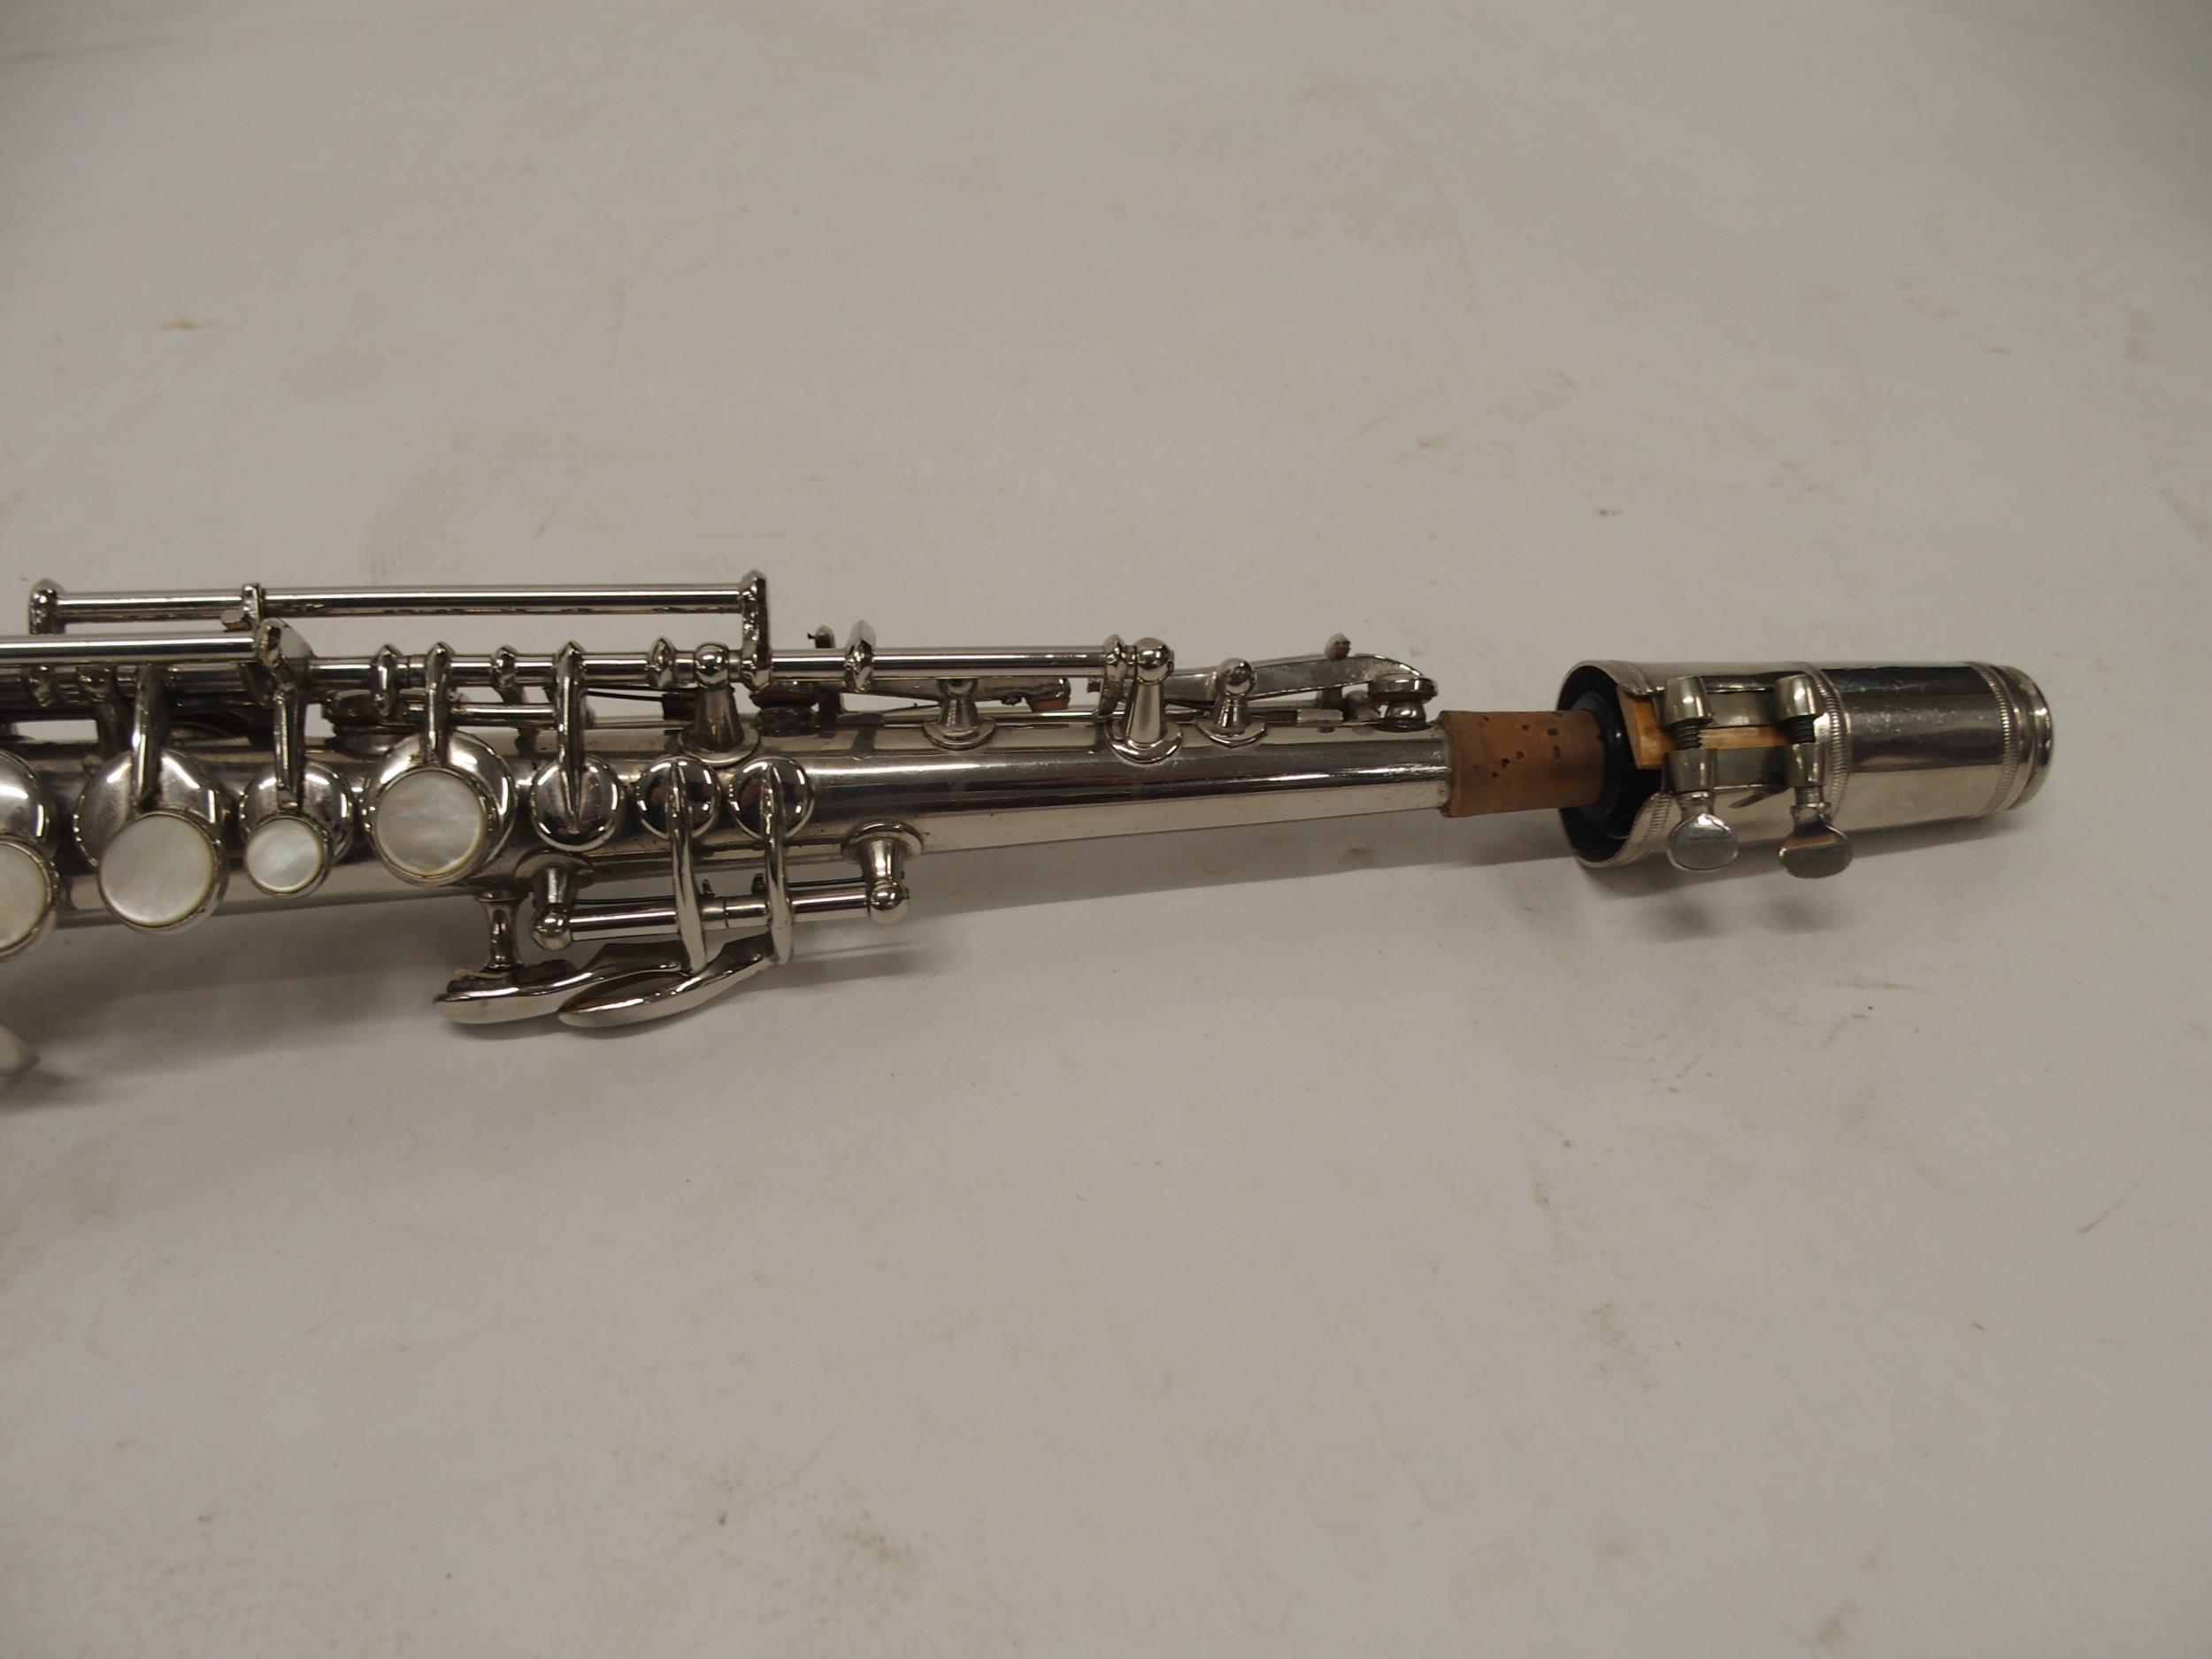 C.G. CONN a white metal soprano saxophone Made by C.G. CONN ELKHART IND. U.S.A. PATD. DEC. 8. 1914 - Image 8 of 11